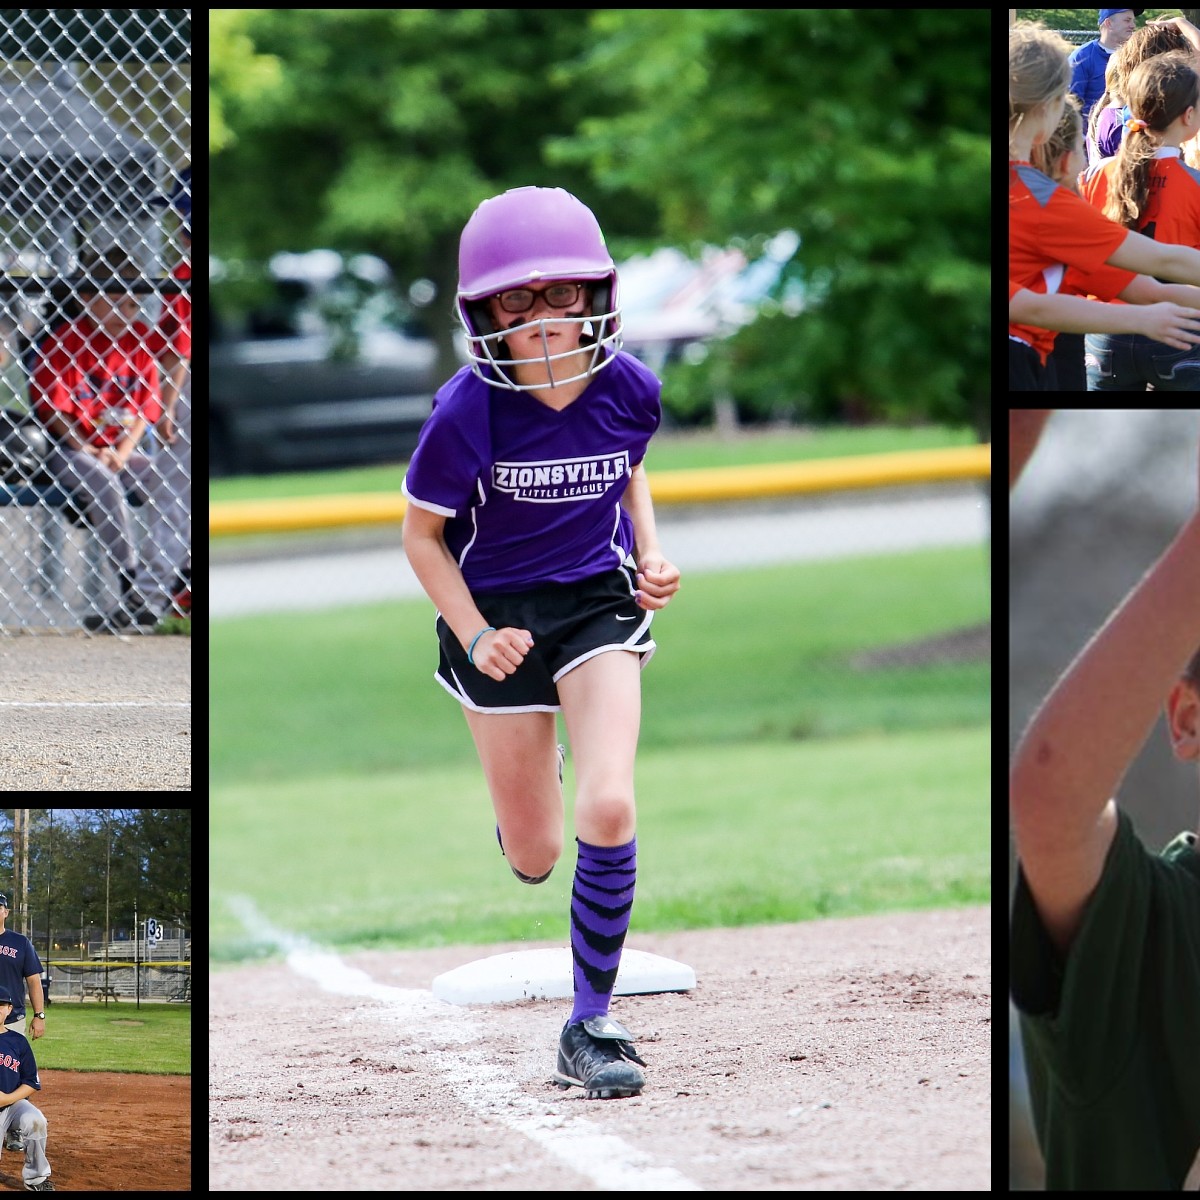 2016-spring-baseball-and-softball-registration-now-open-zionsville